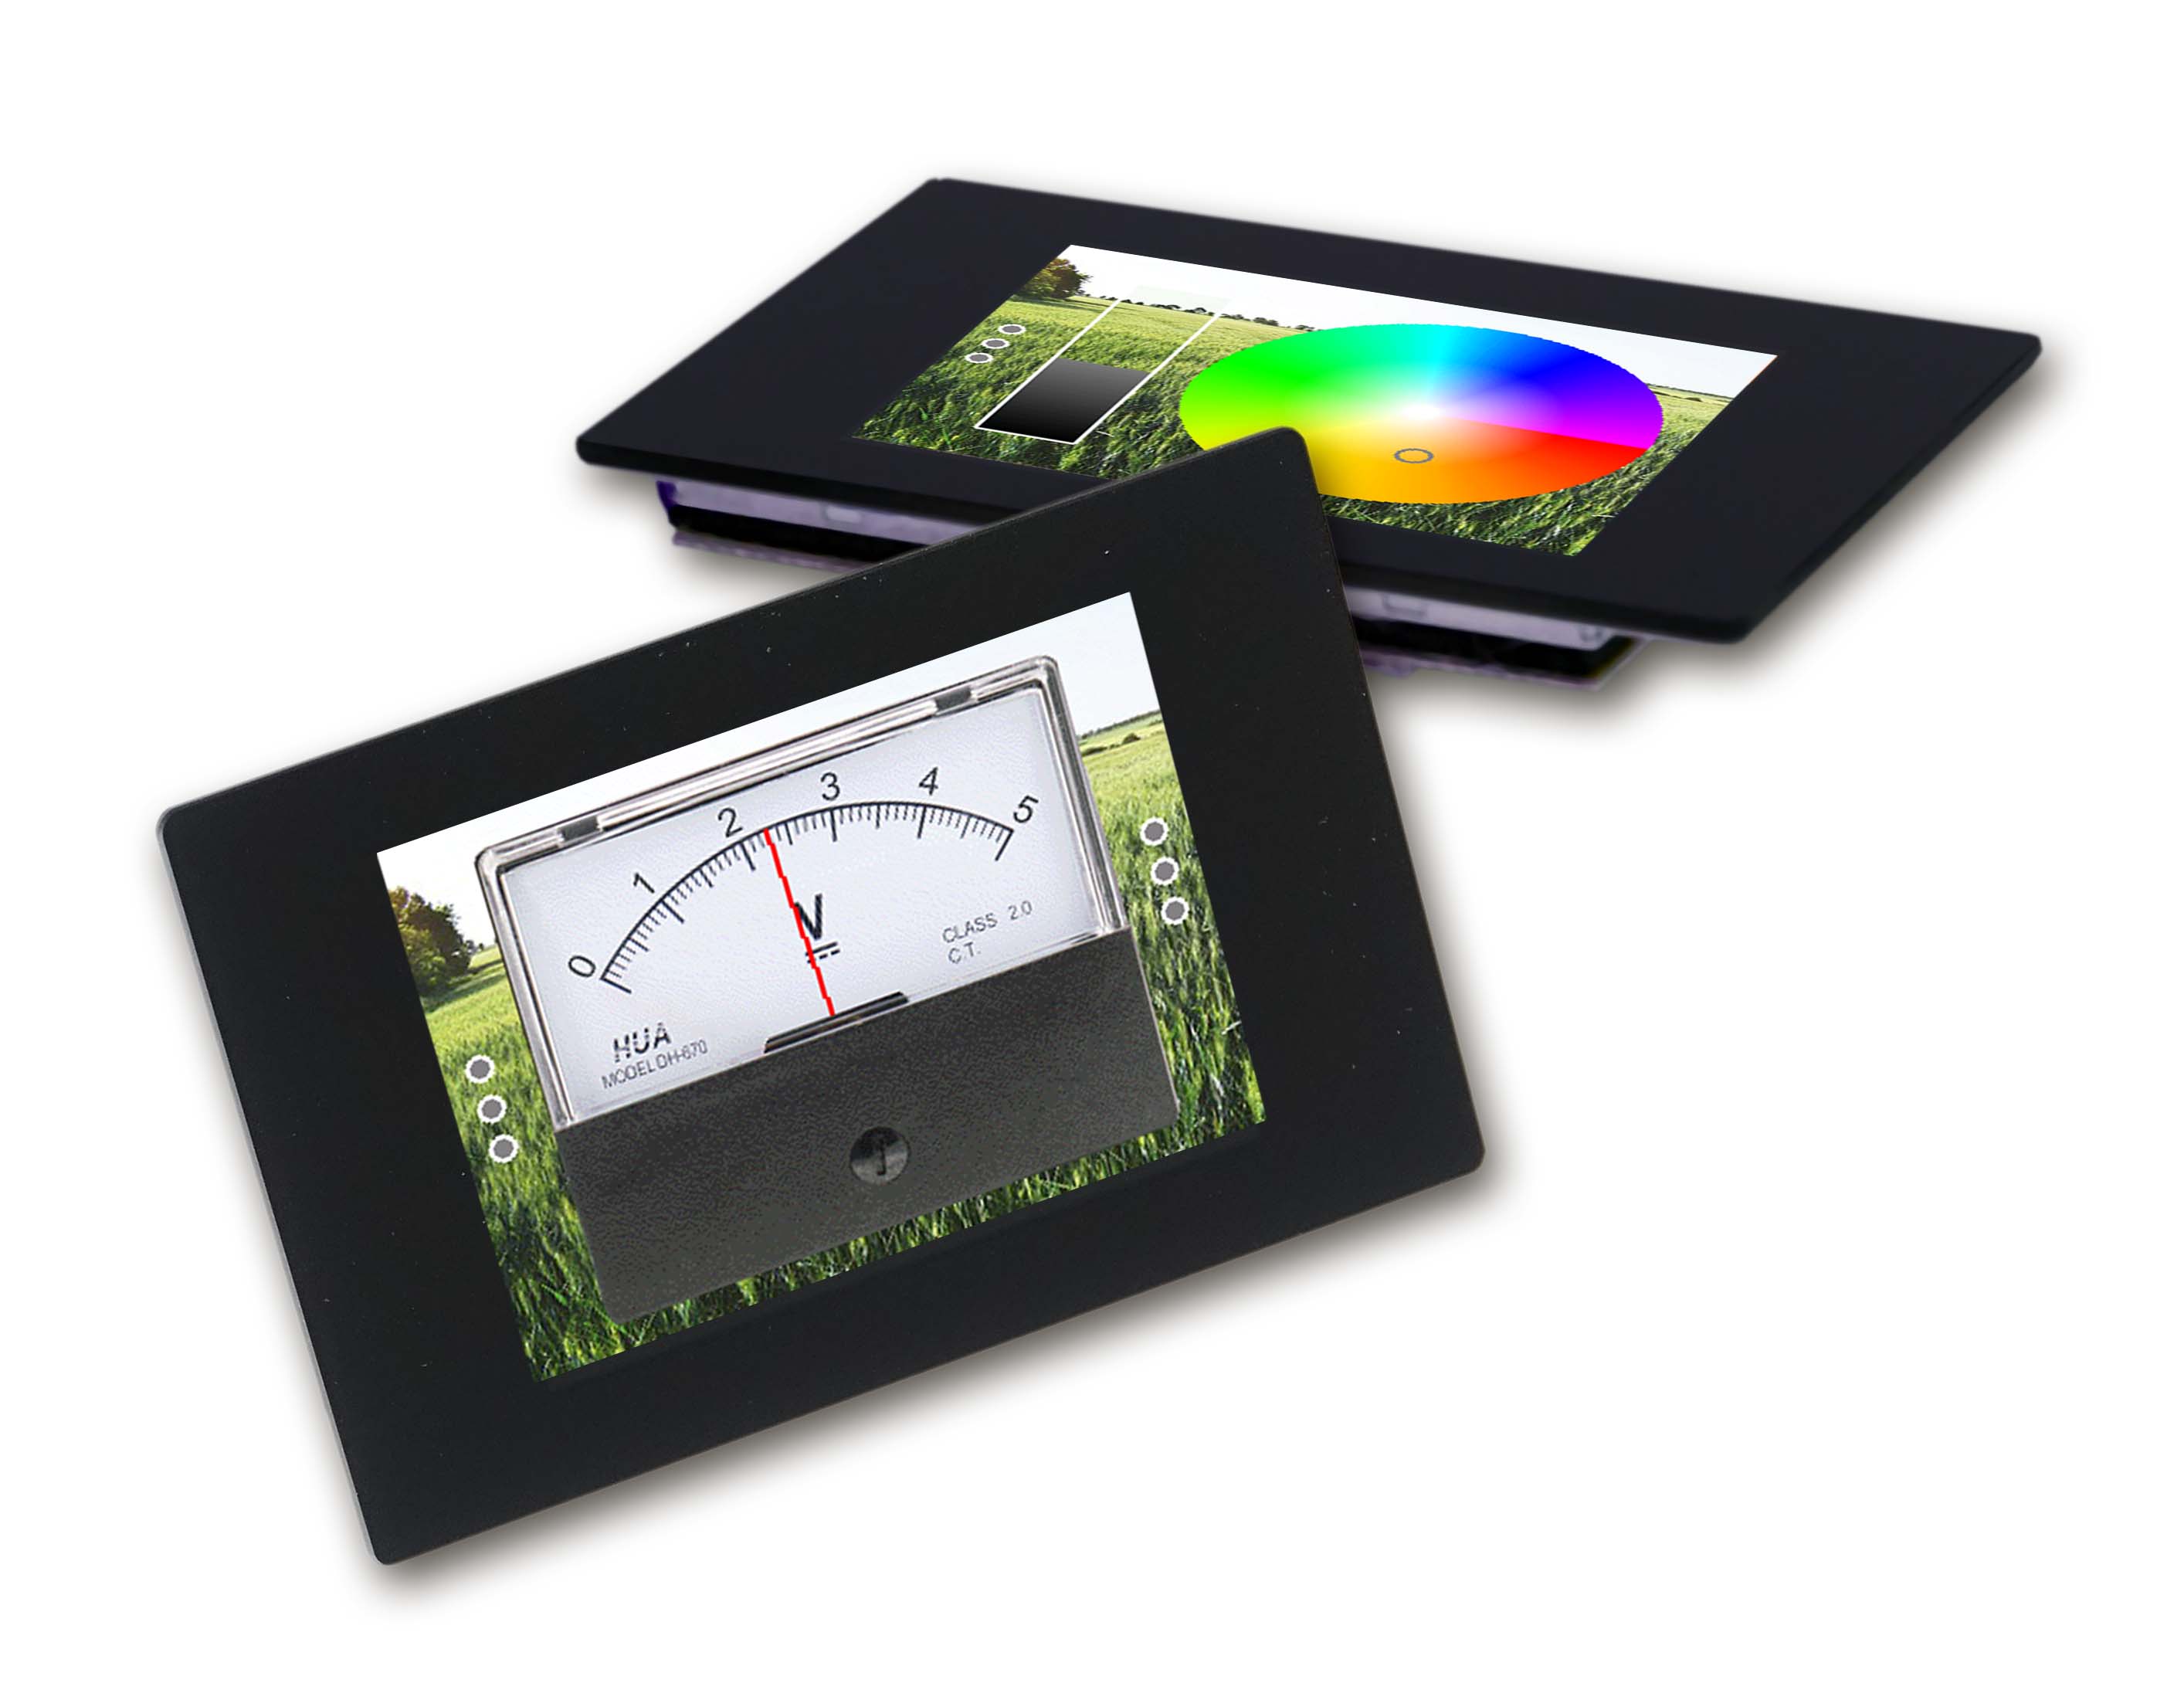 Intelligent display modules for home automation for display, control and regulation